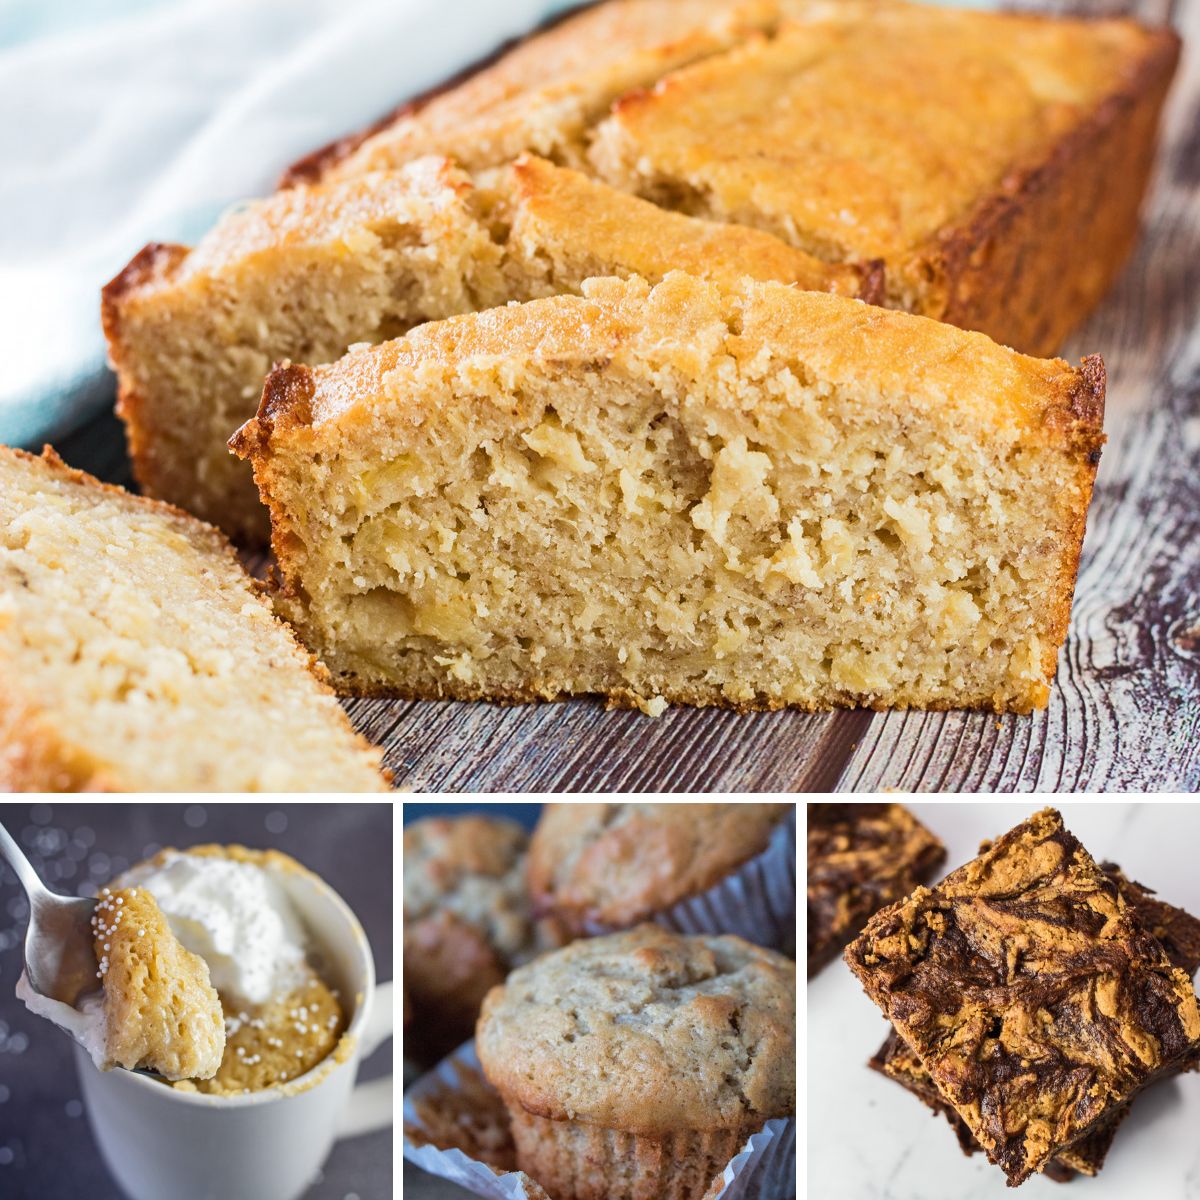 Best banana recipes collection featuring 4 tasty treats in a collage image.